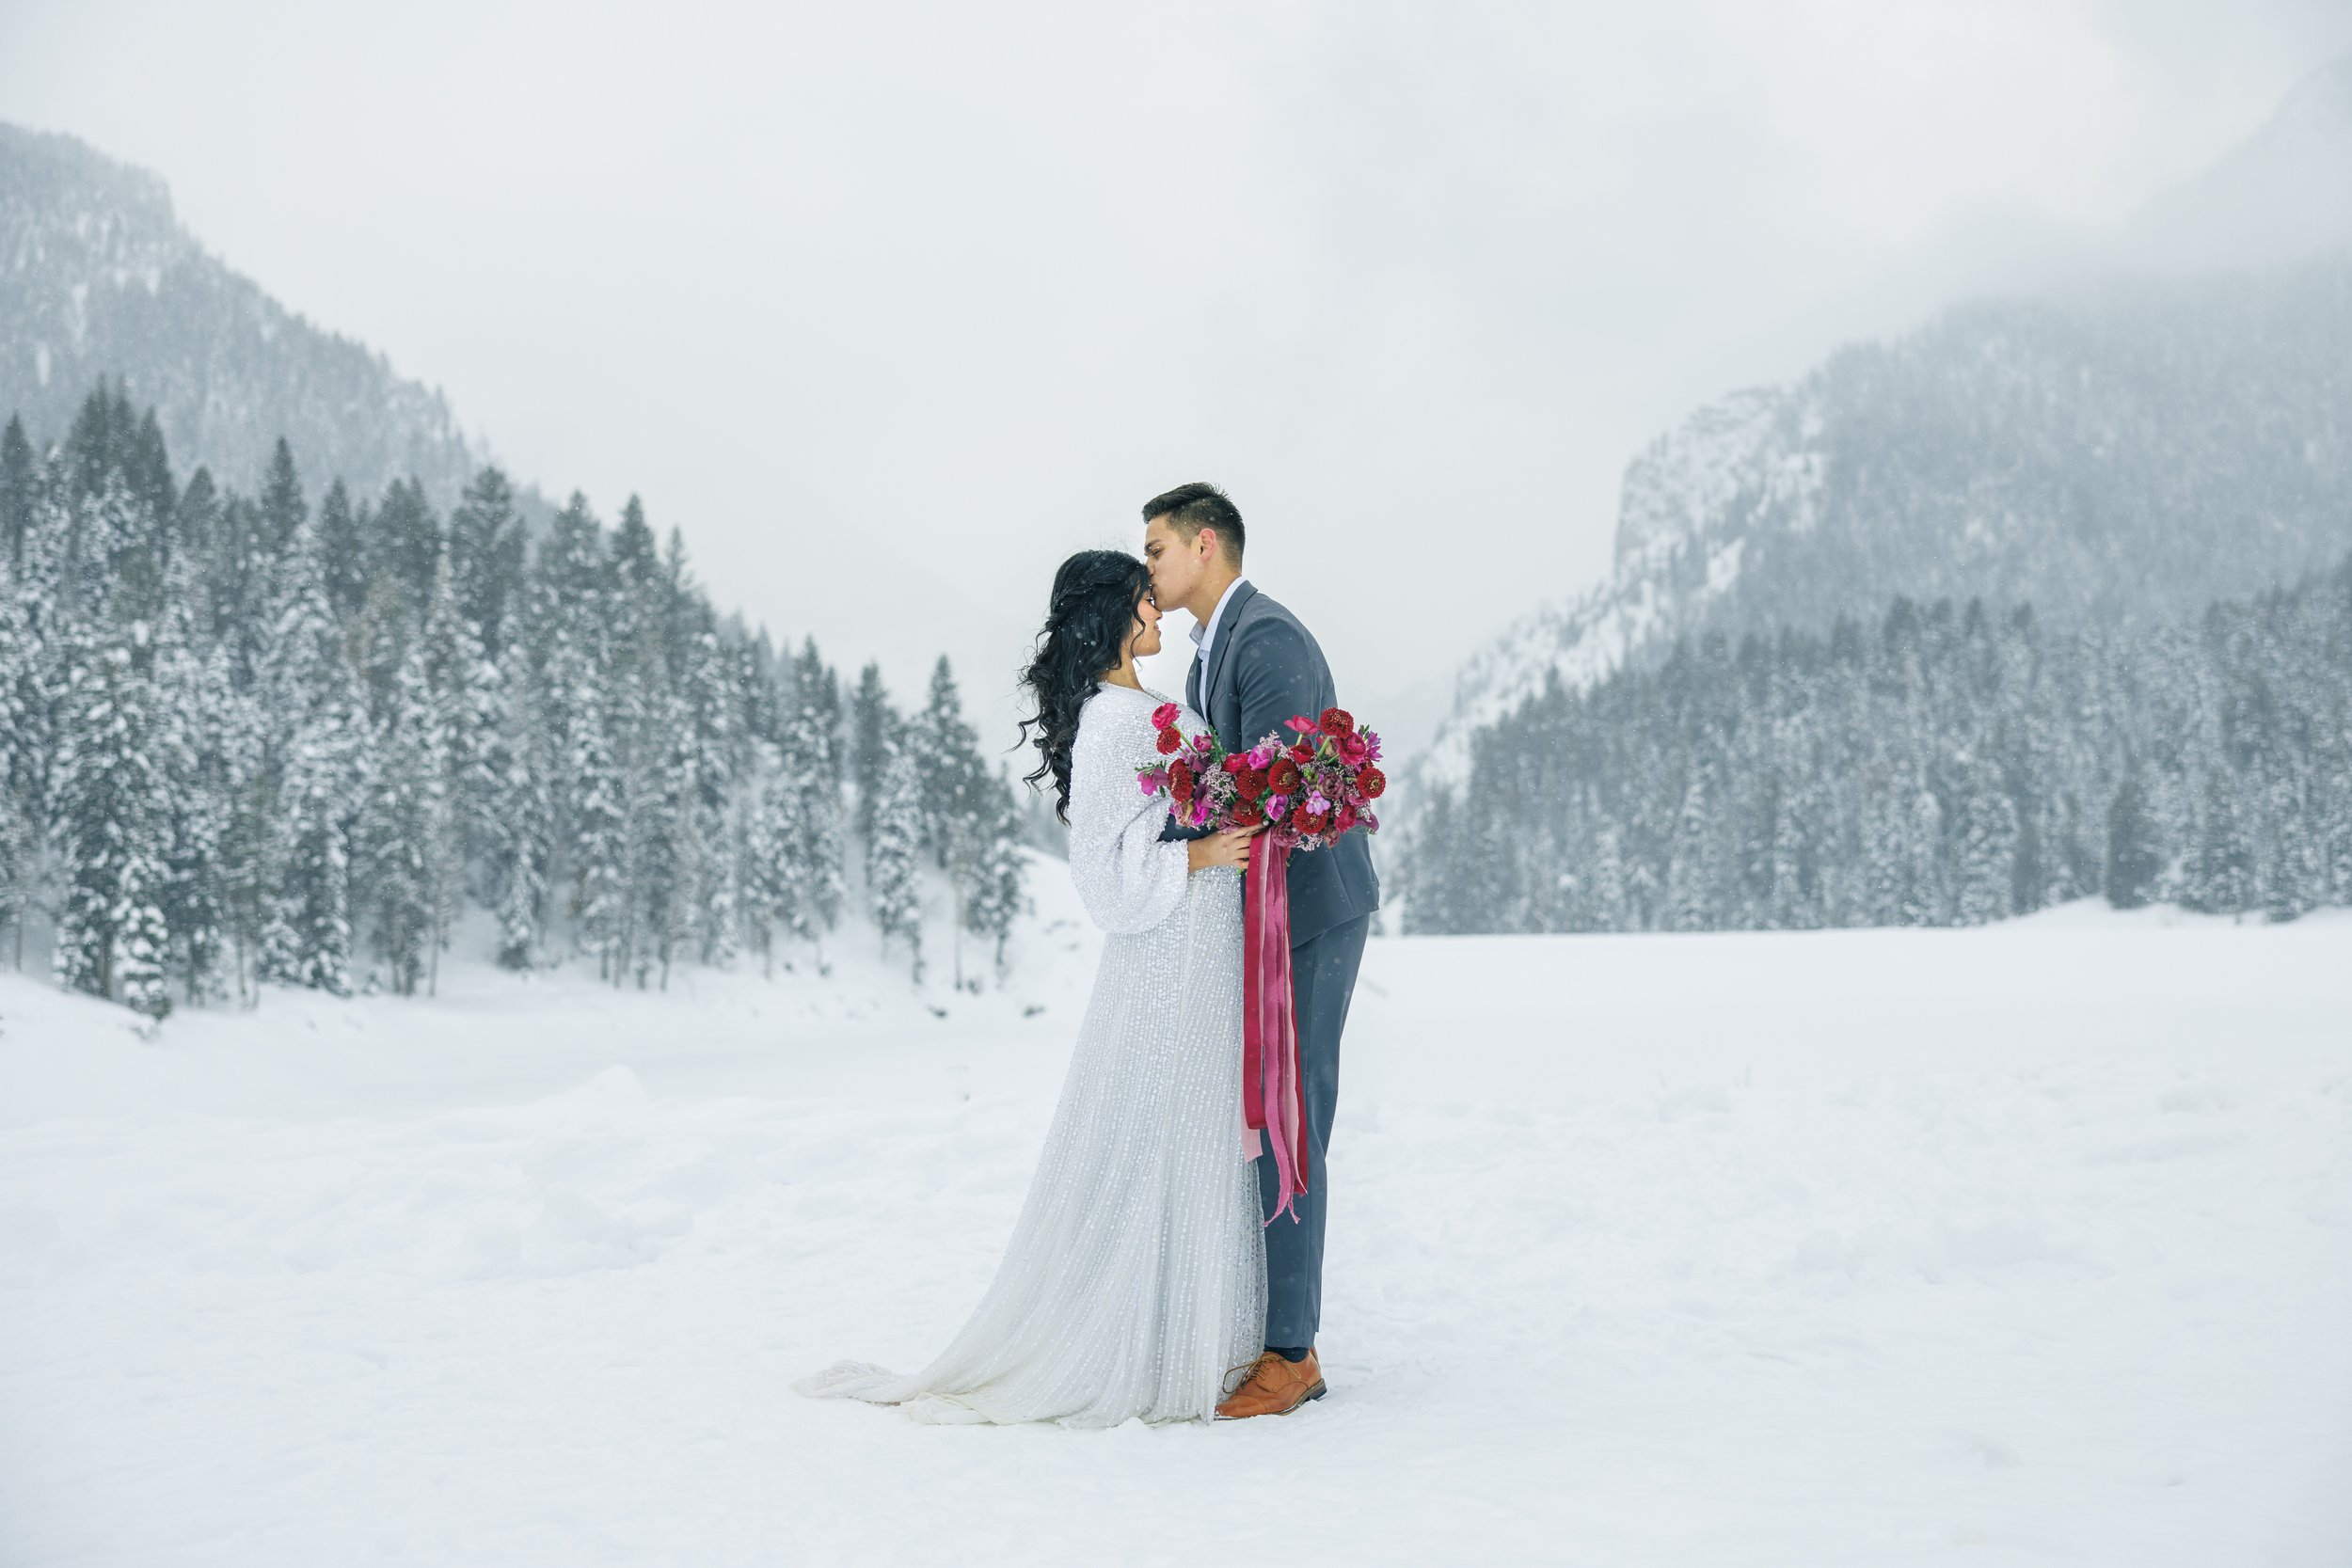  A groom kisses his bride on a snowy mountainside in Northern Utah by Savanna Richardson Photography. winter wedding #SavannaRichardsonPhotography #SavannaRichardsonBridals #WinterBridals #WinterWedding #TibbleForkBridals #UtahBridals #MountainBridal